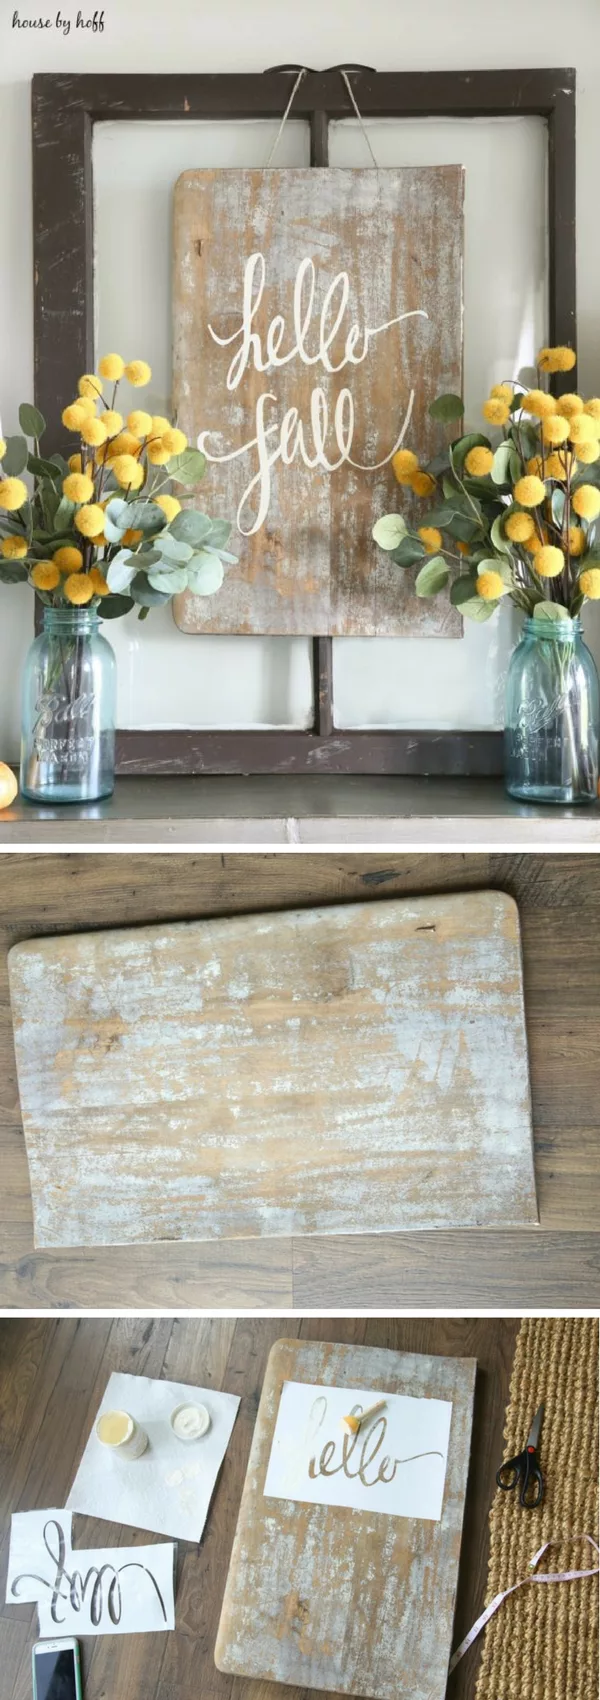 17 Fab DIY Farmhouse Signs You Can Make Yourself - Check out how to make an easy DIY Fall Sign for farmhouse style